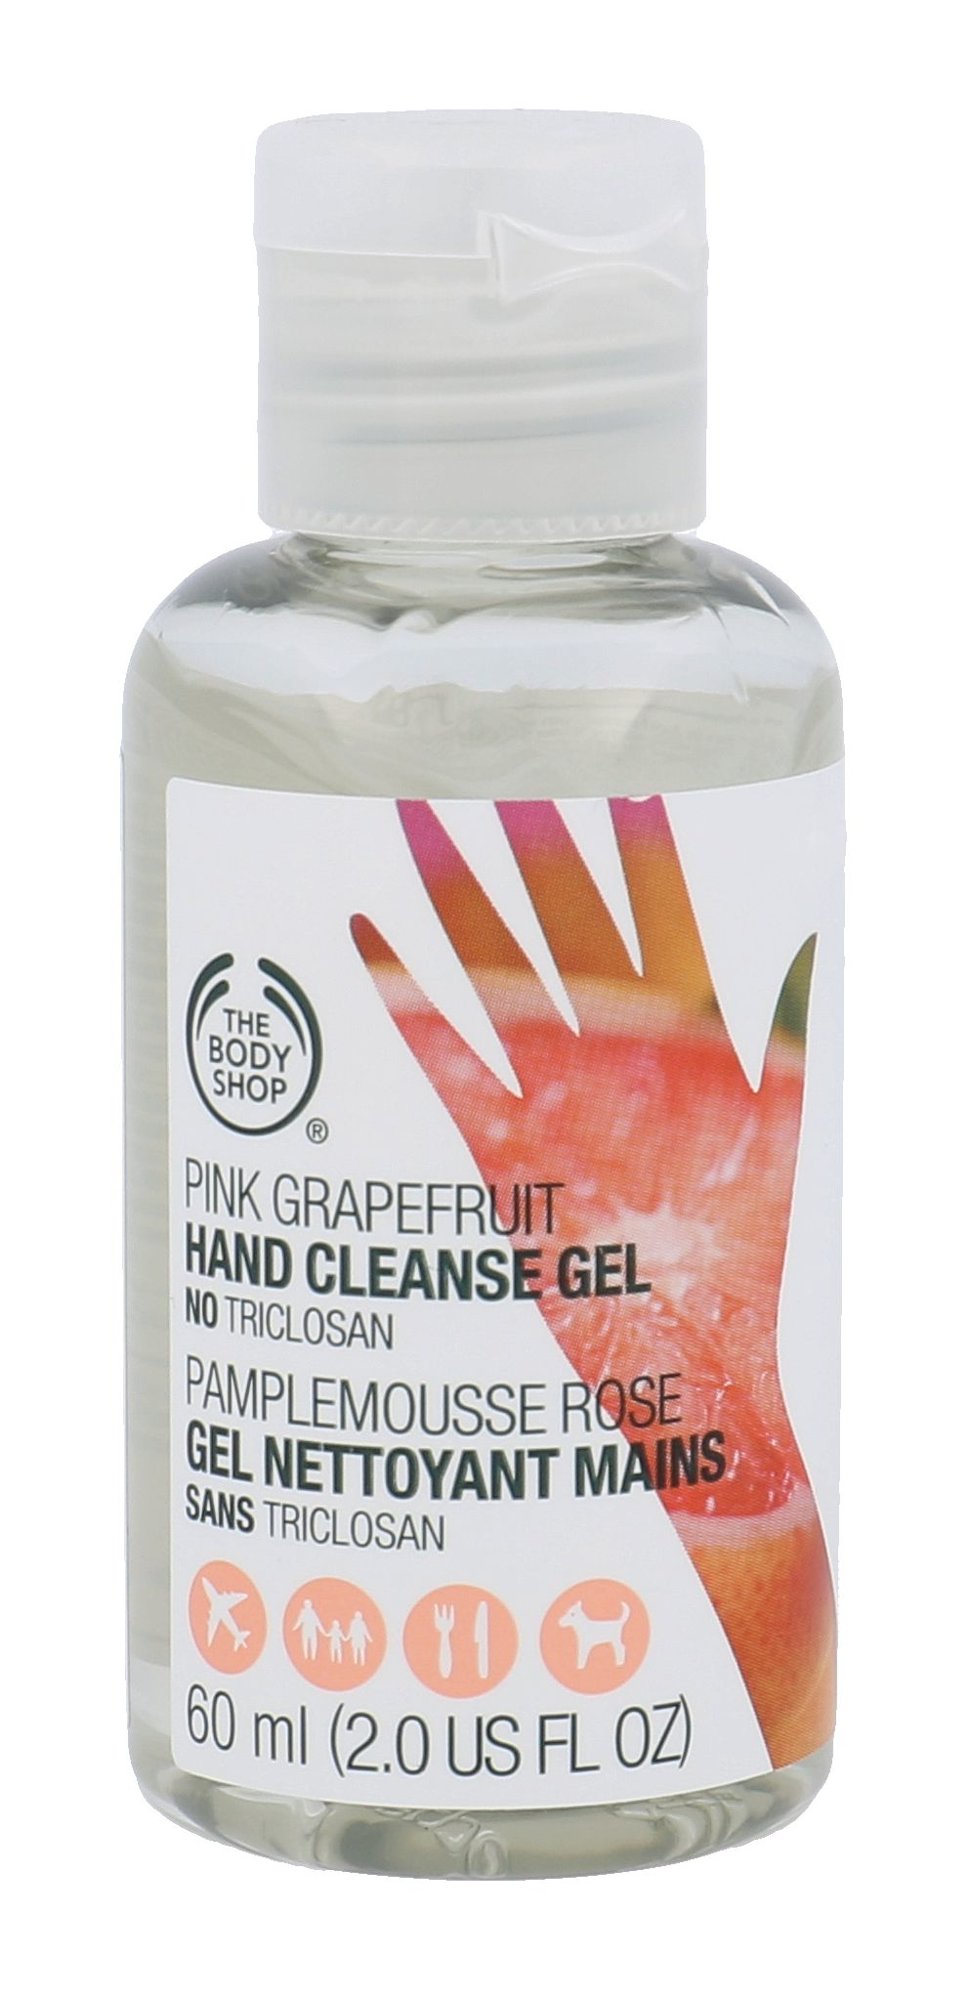 The Body Shop Pink Grapefruit Hand Cleanse Gel